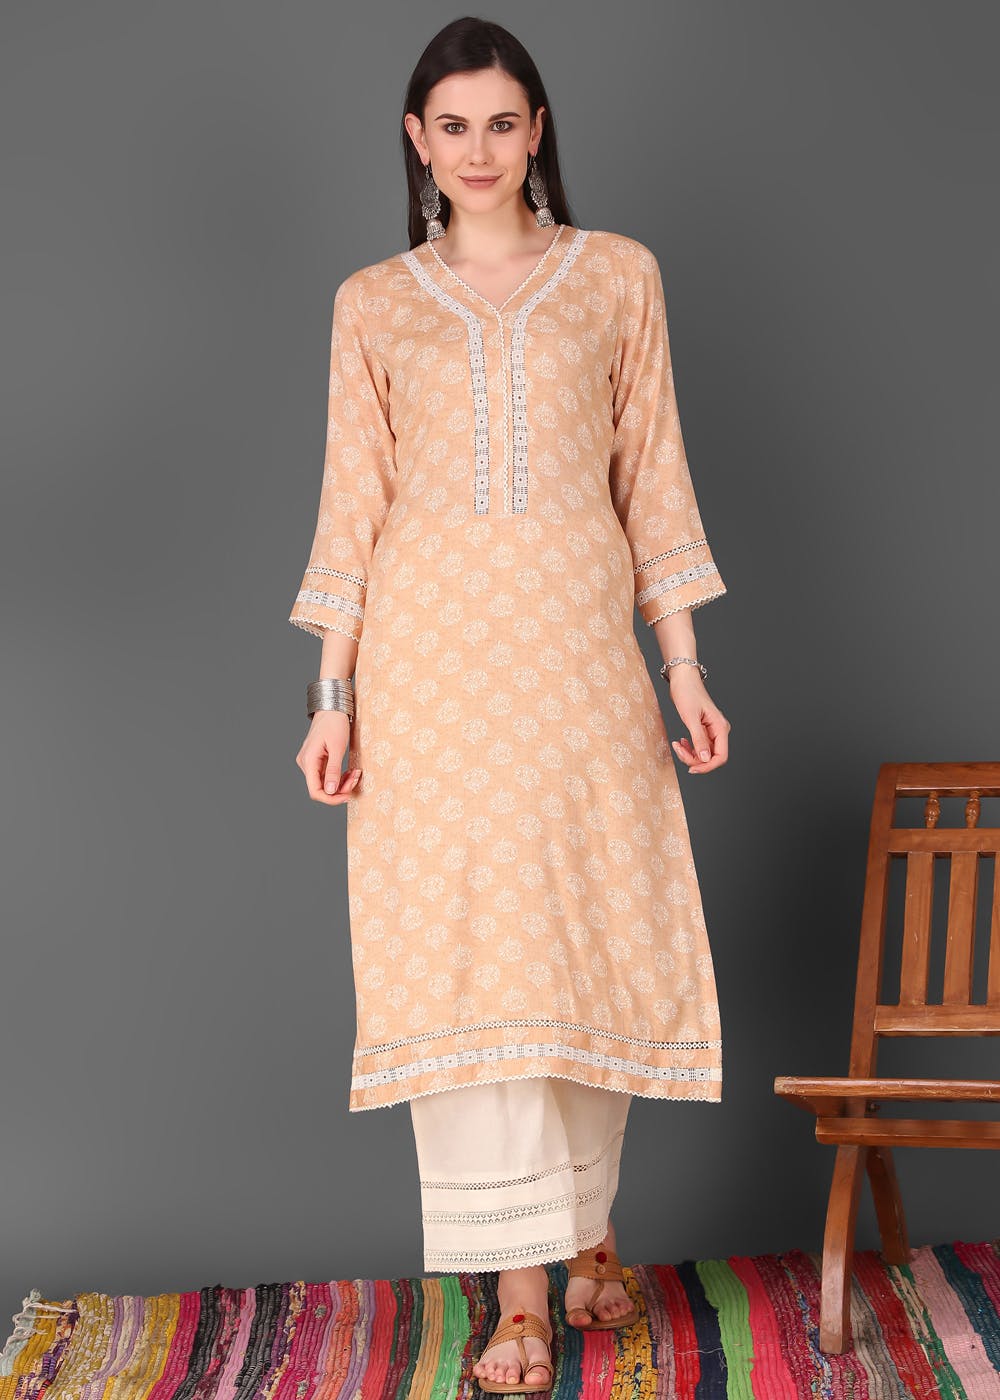 Explore The Best Ethnic Wear Brands For Online Shopping